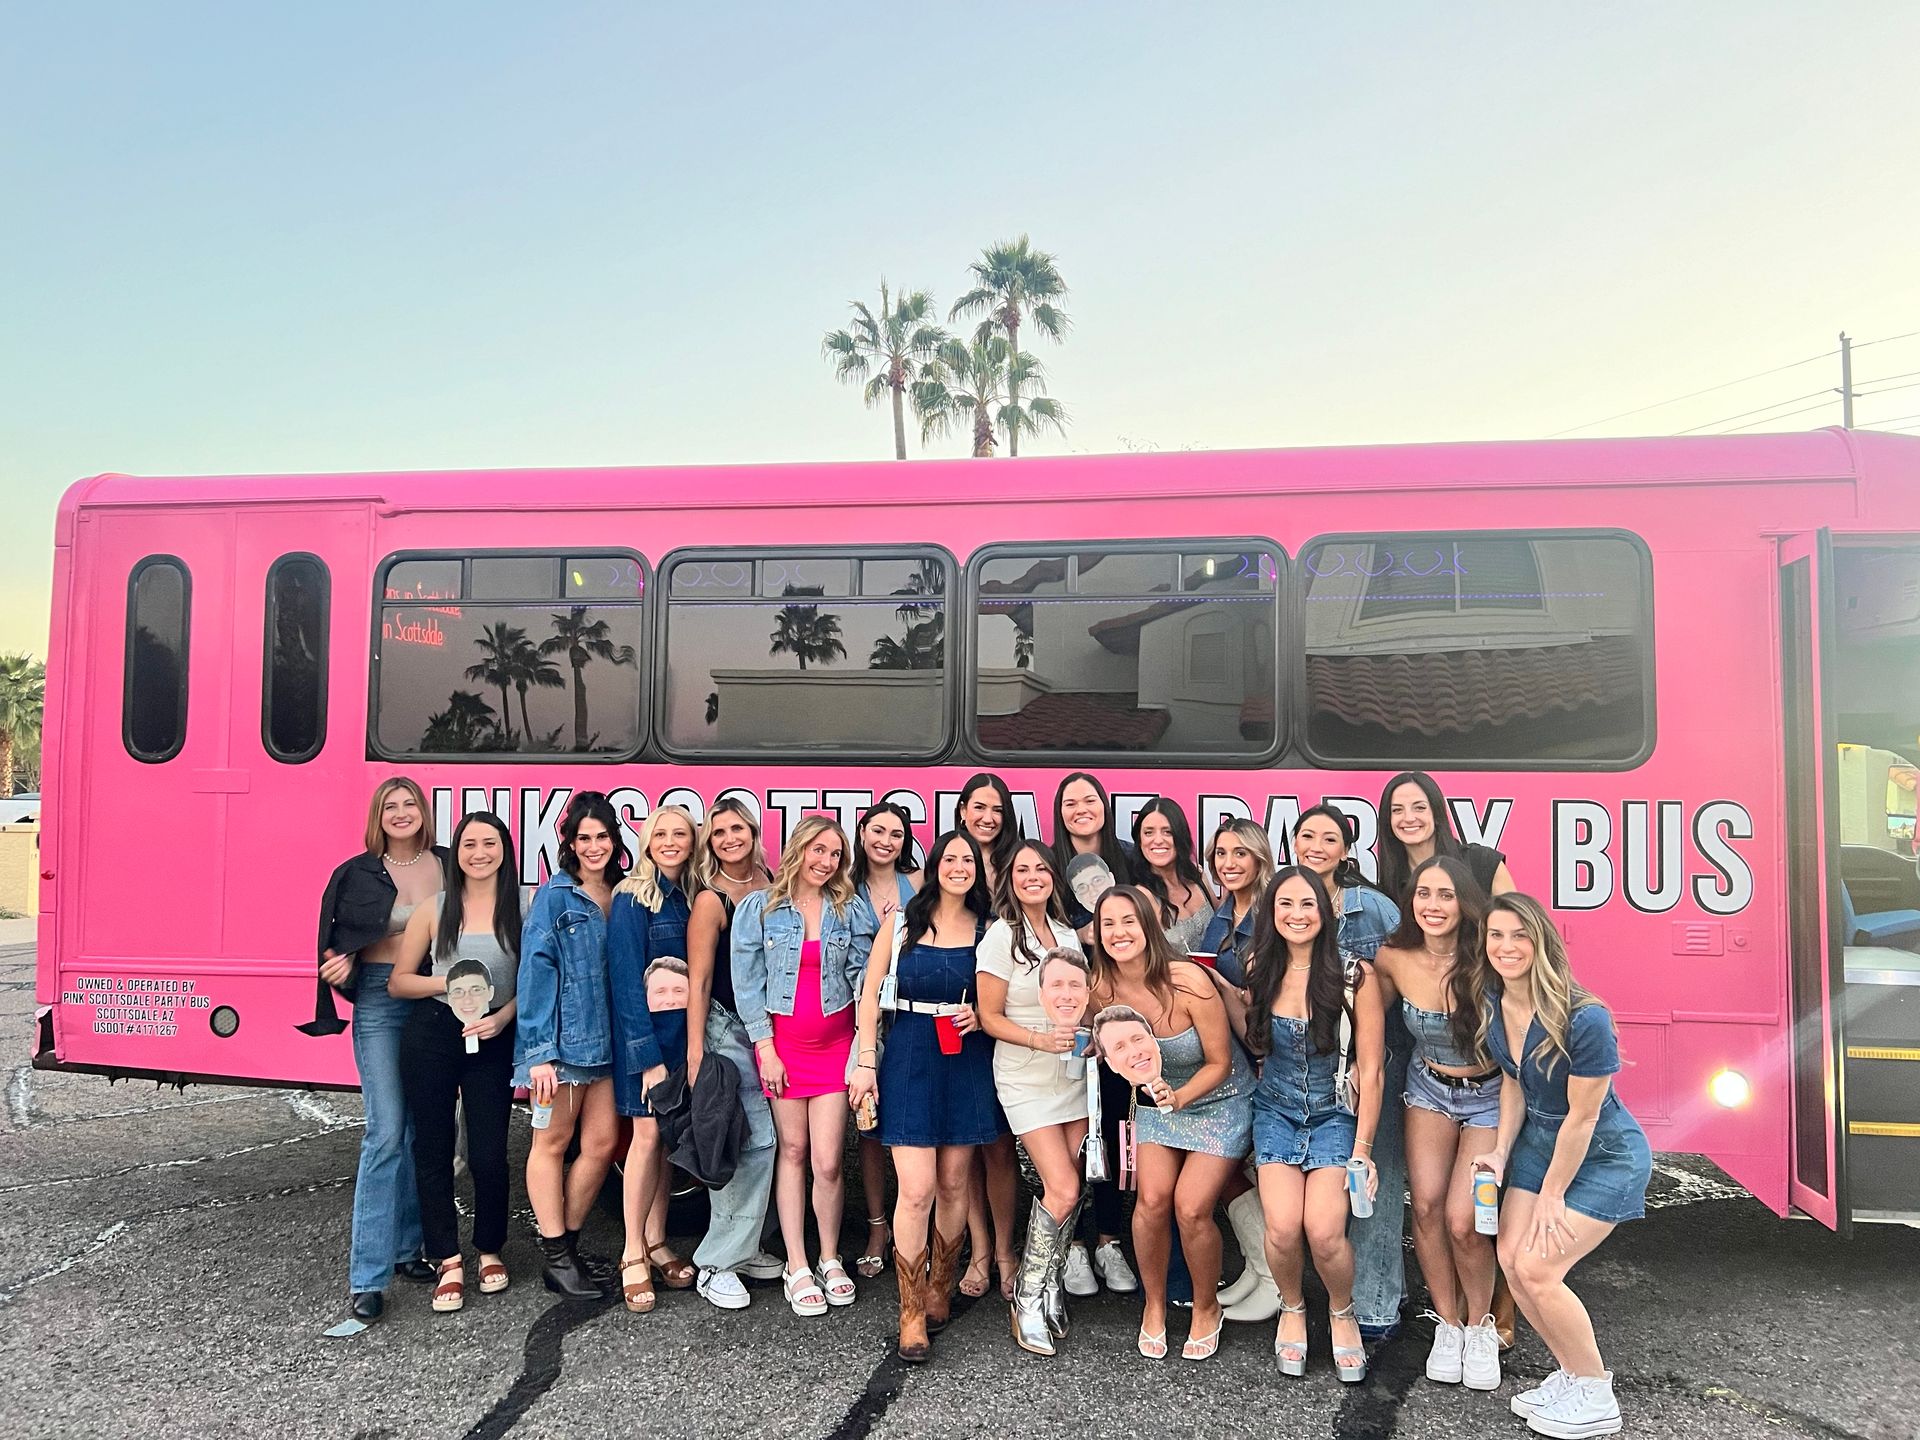 Stunning Pink Party Bus Rental: Day Trip, Night on the Town, Airport Shuttle & More (BYOB) image 1